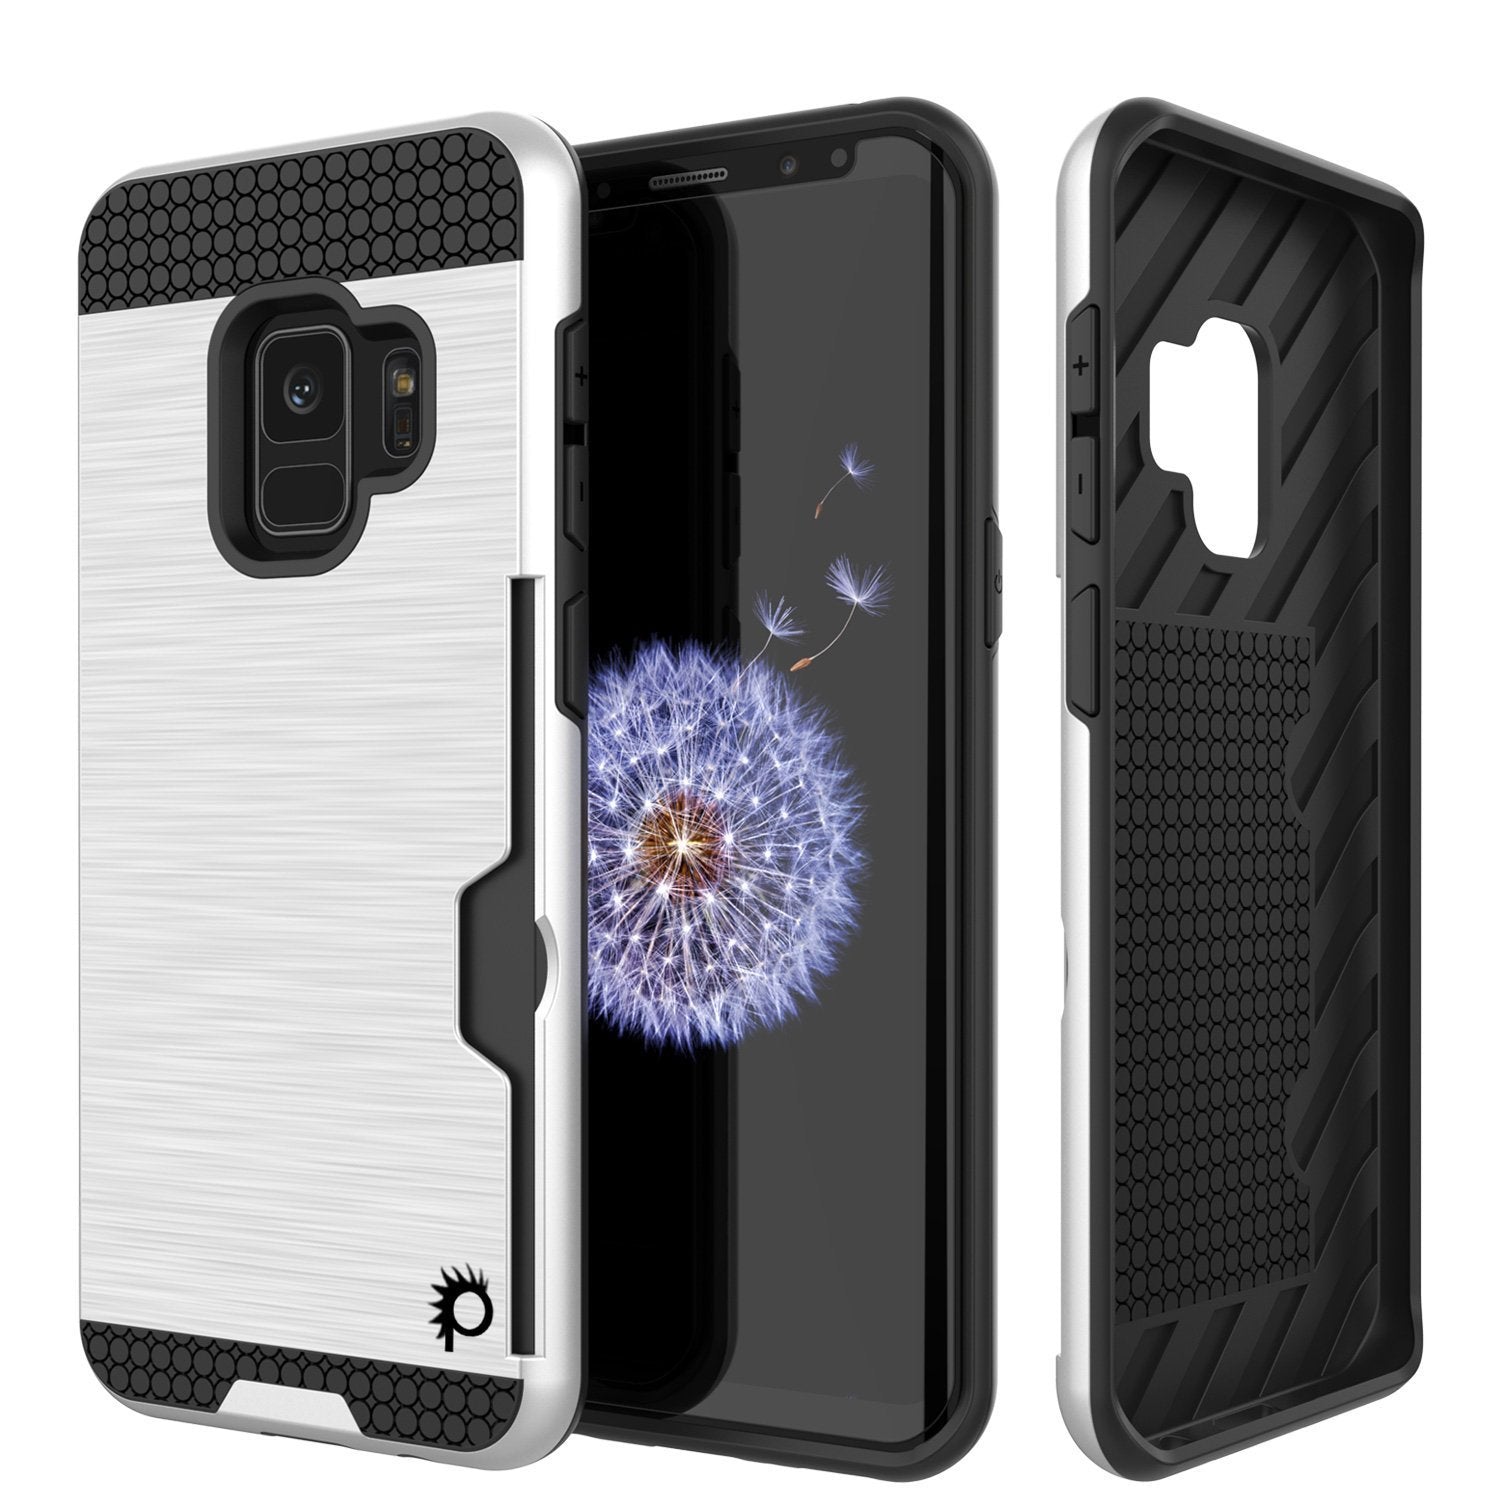 Galaxy S9 Case, PUNKcase [SLOT Series] [Slim Fit] Dual-Layer Armor Cover w/Integrated Anti-Shock System, Credit Card Slot & Screen Protector [White] - PunkCase NZ